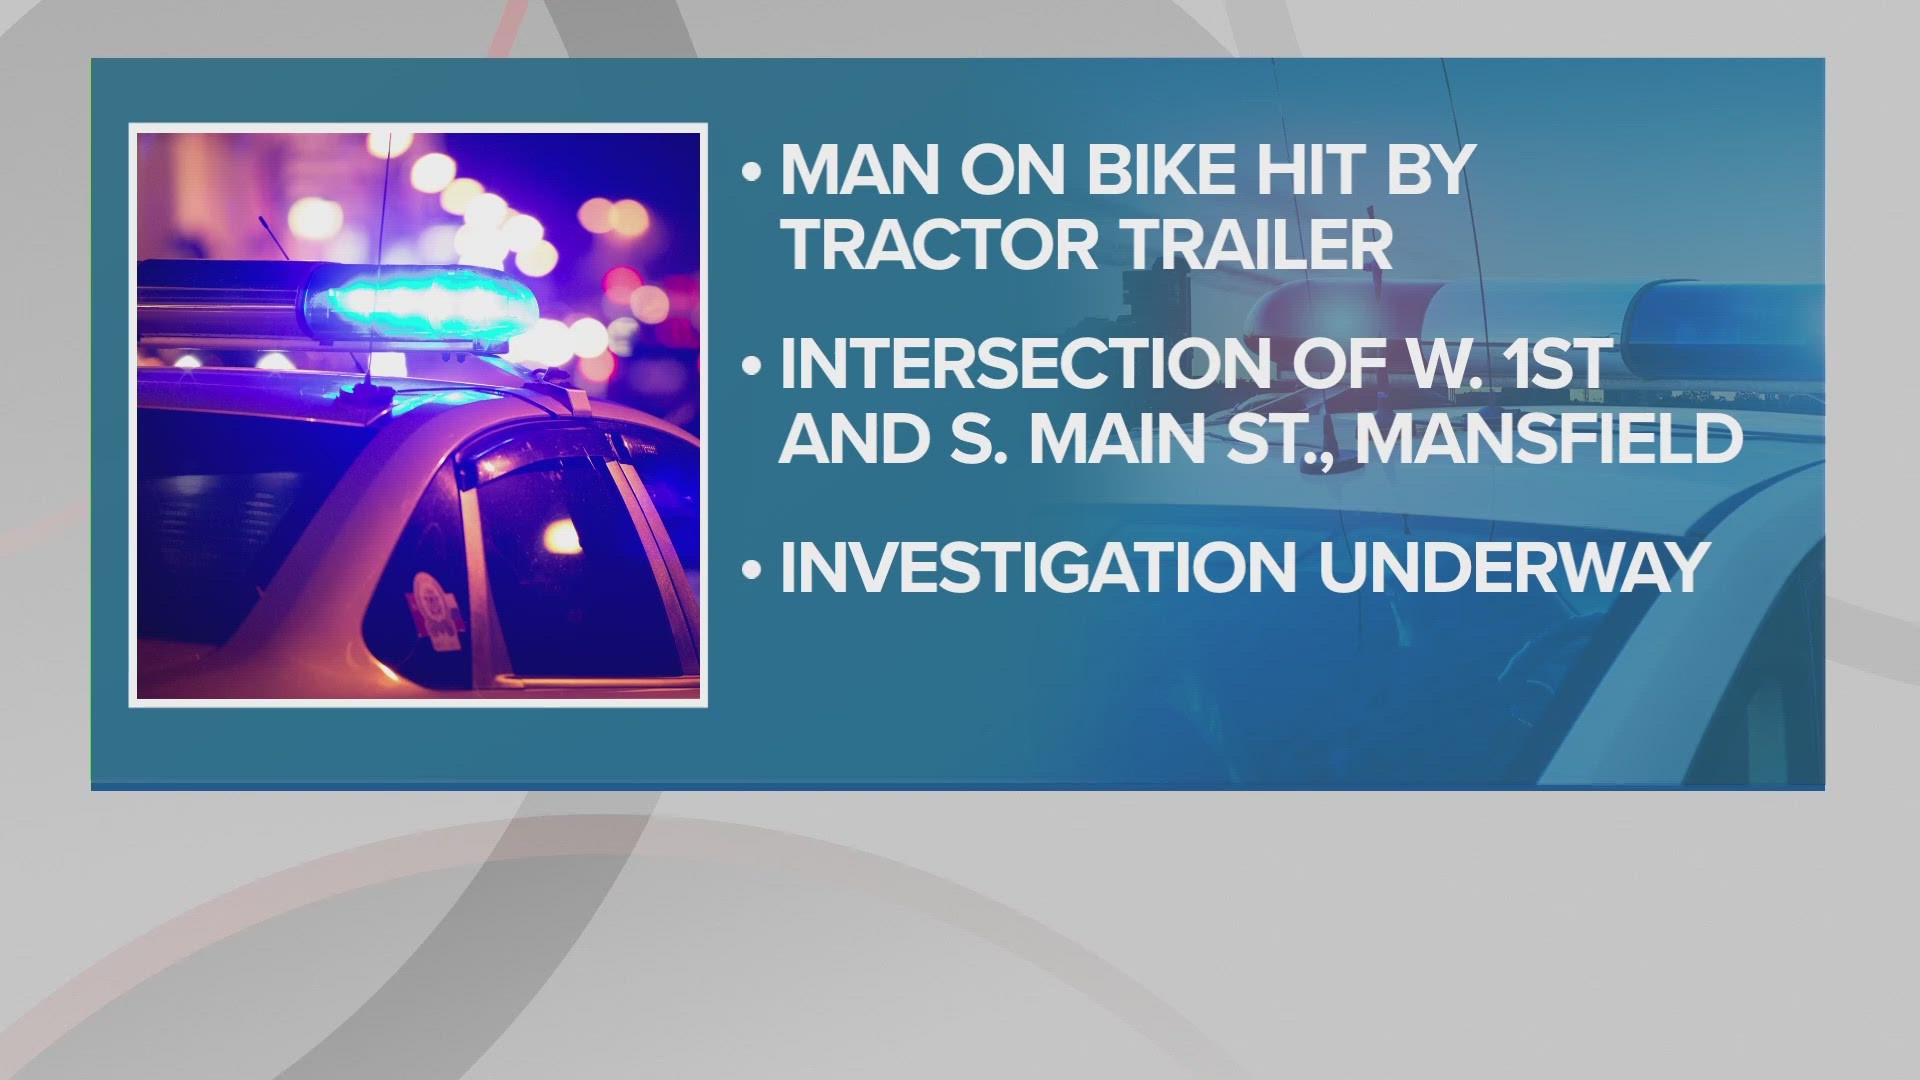 Police say a 29-year-old man was riding a bicycle when he traveled through a red light and into the path of a tractor-trailer.